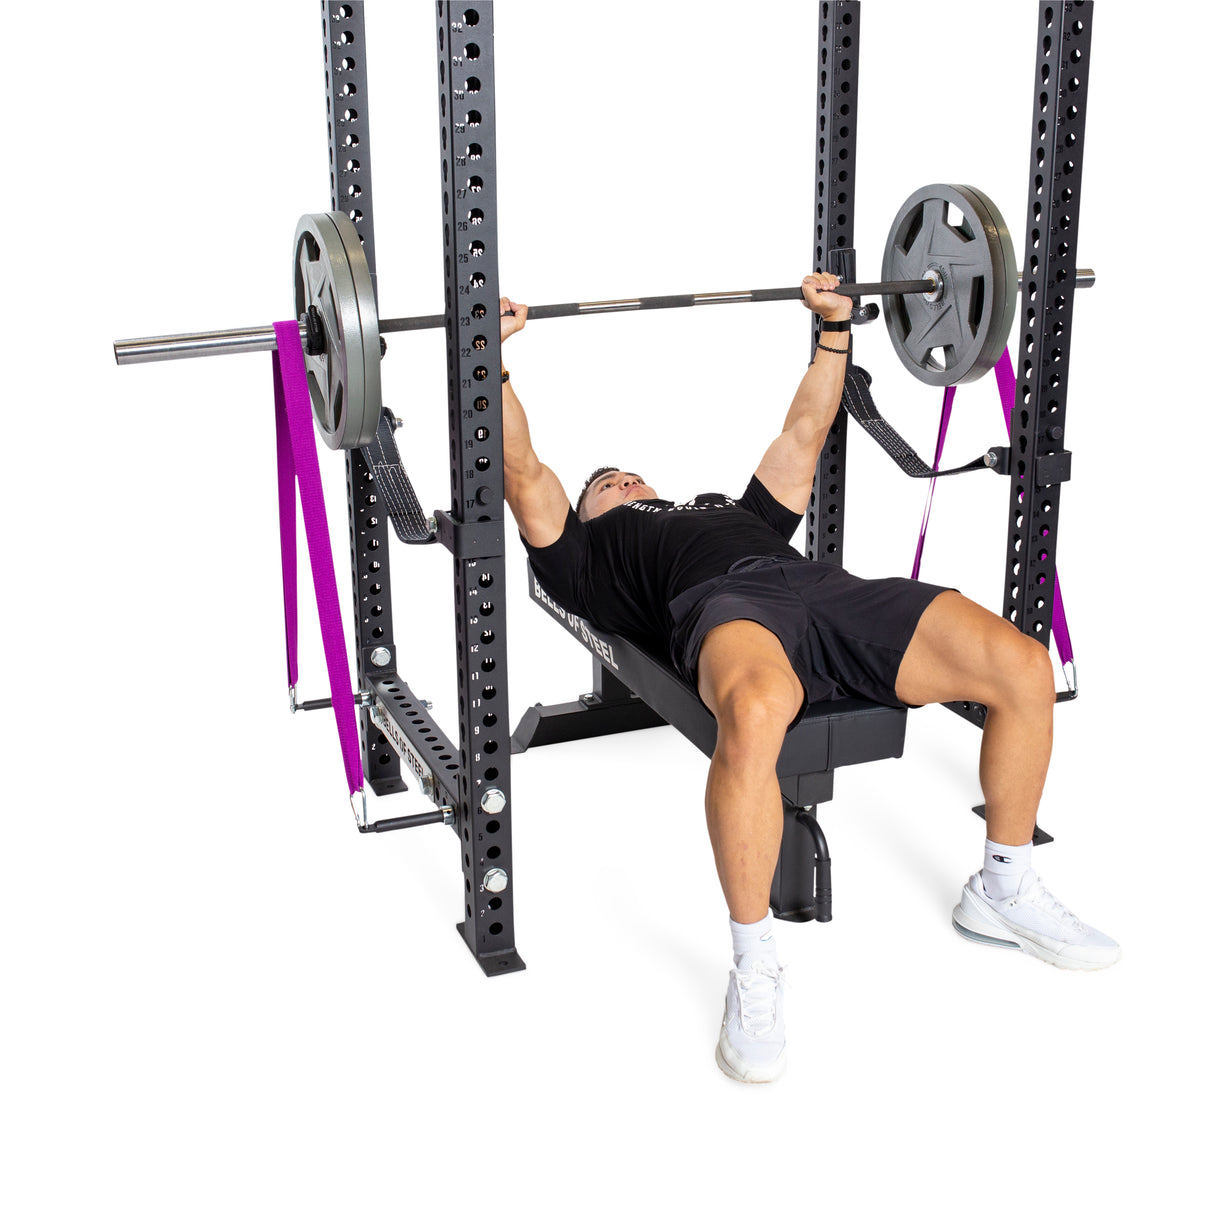 Athlete doing bench press using Band Pegs with Carabiners